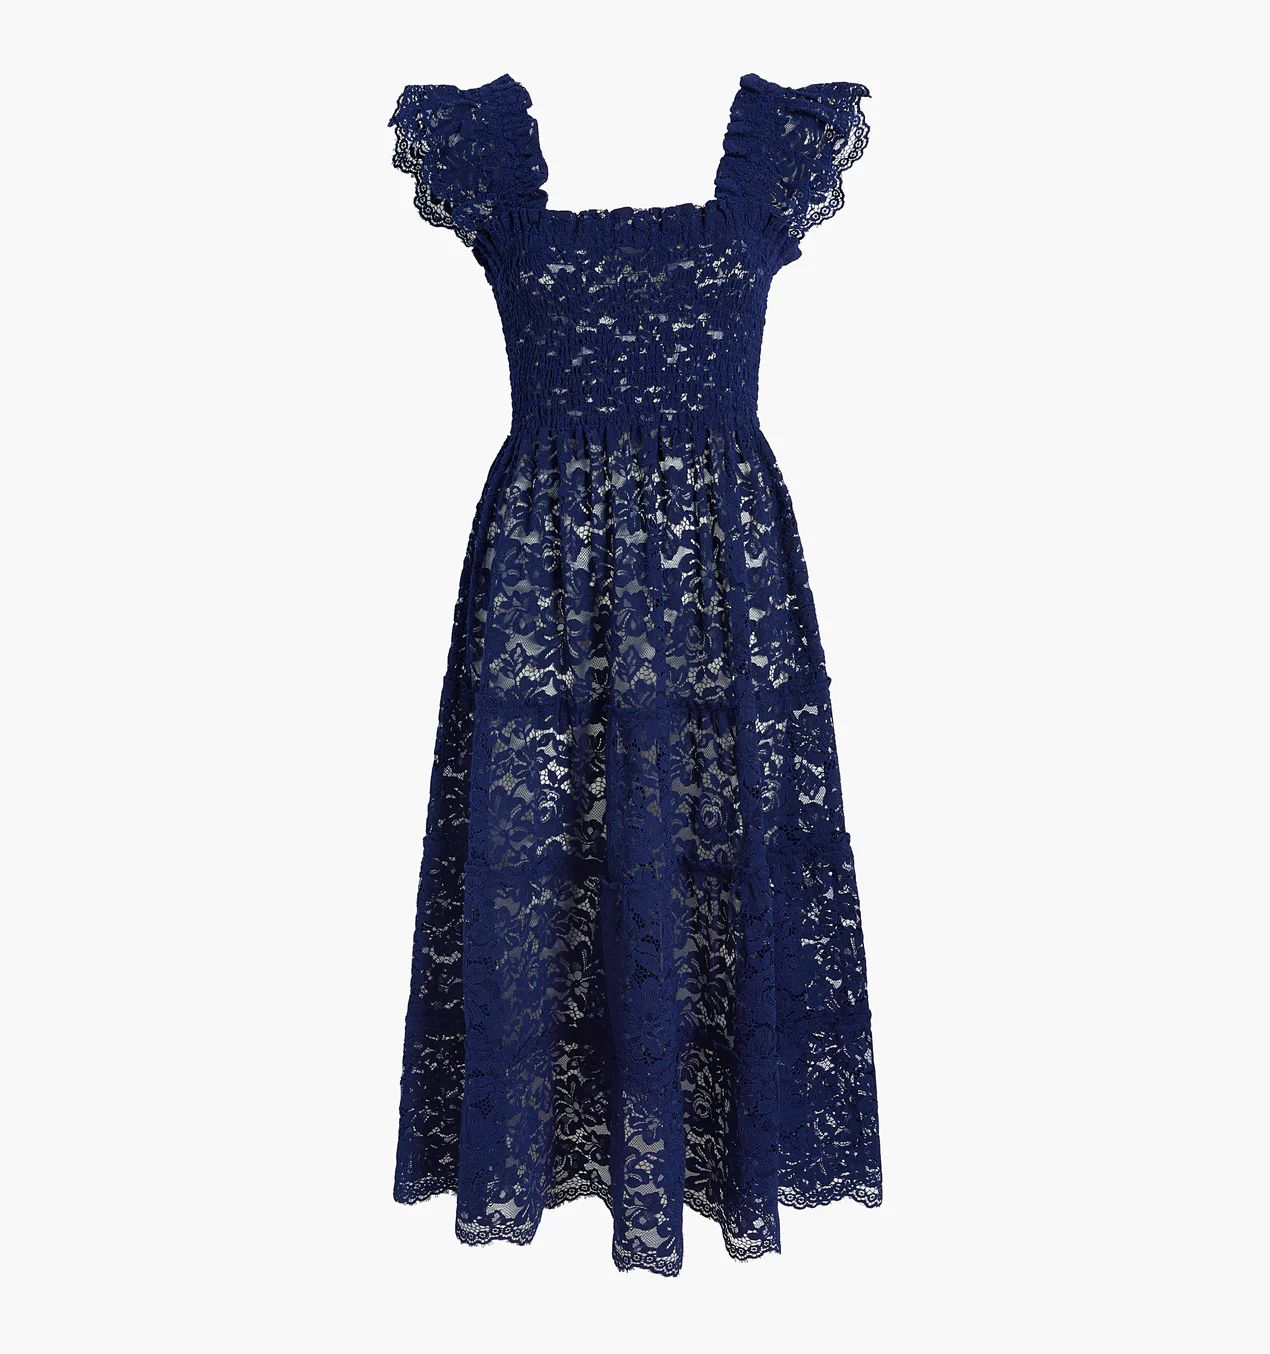 The Lace Ellie Nap Dress - Navy Lace | Hill House Home